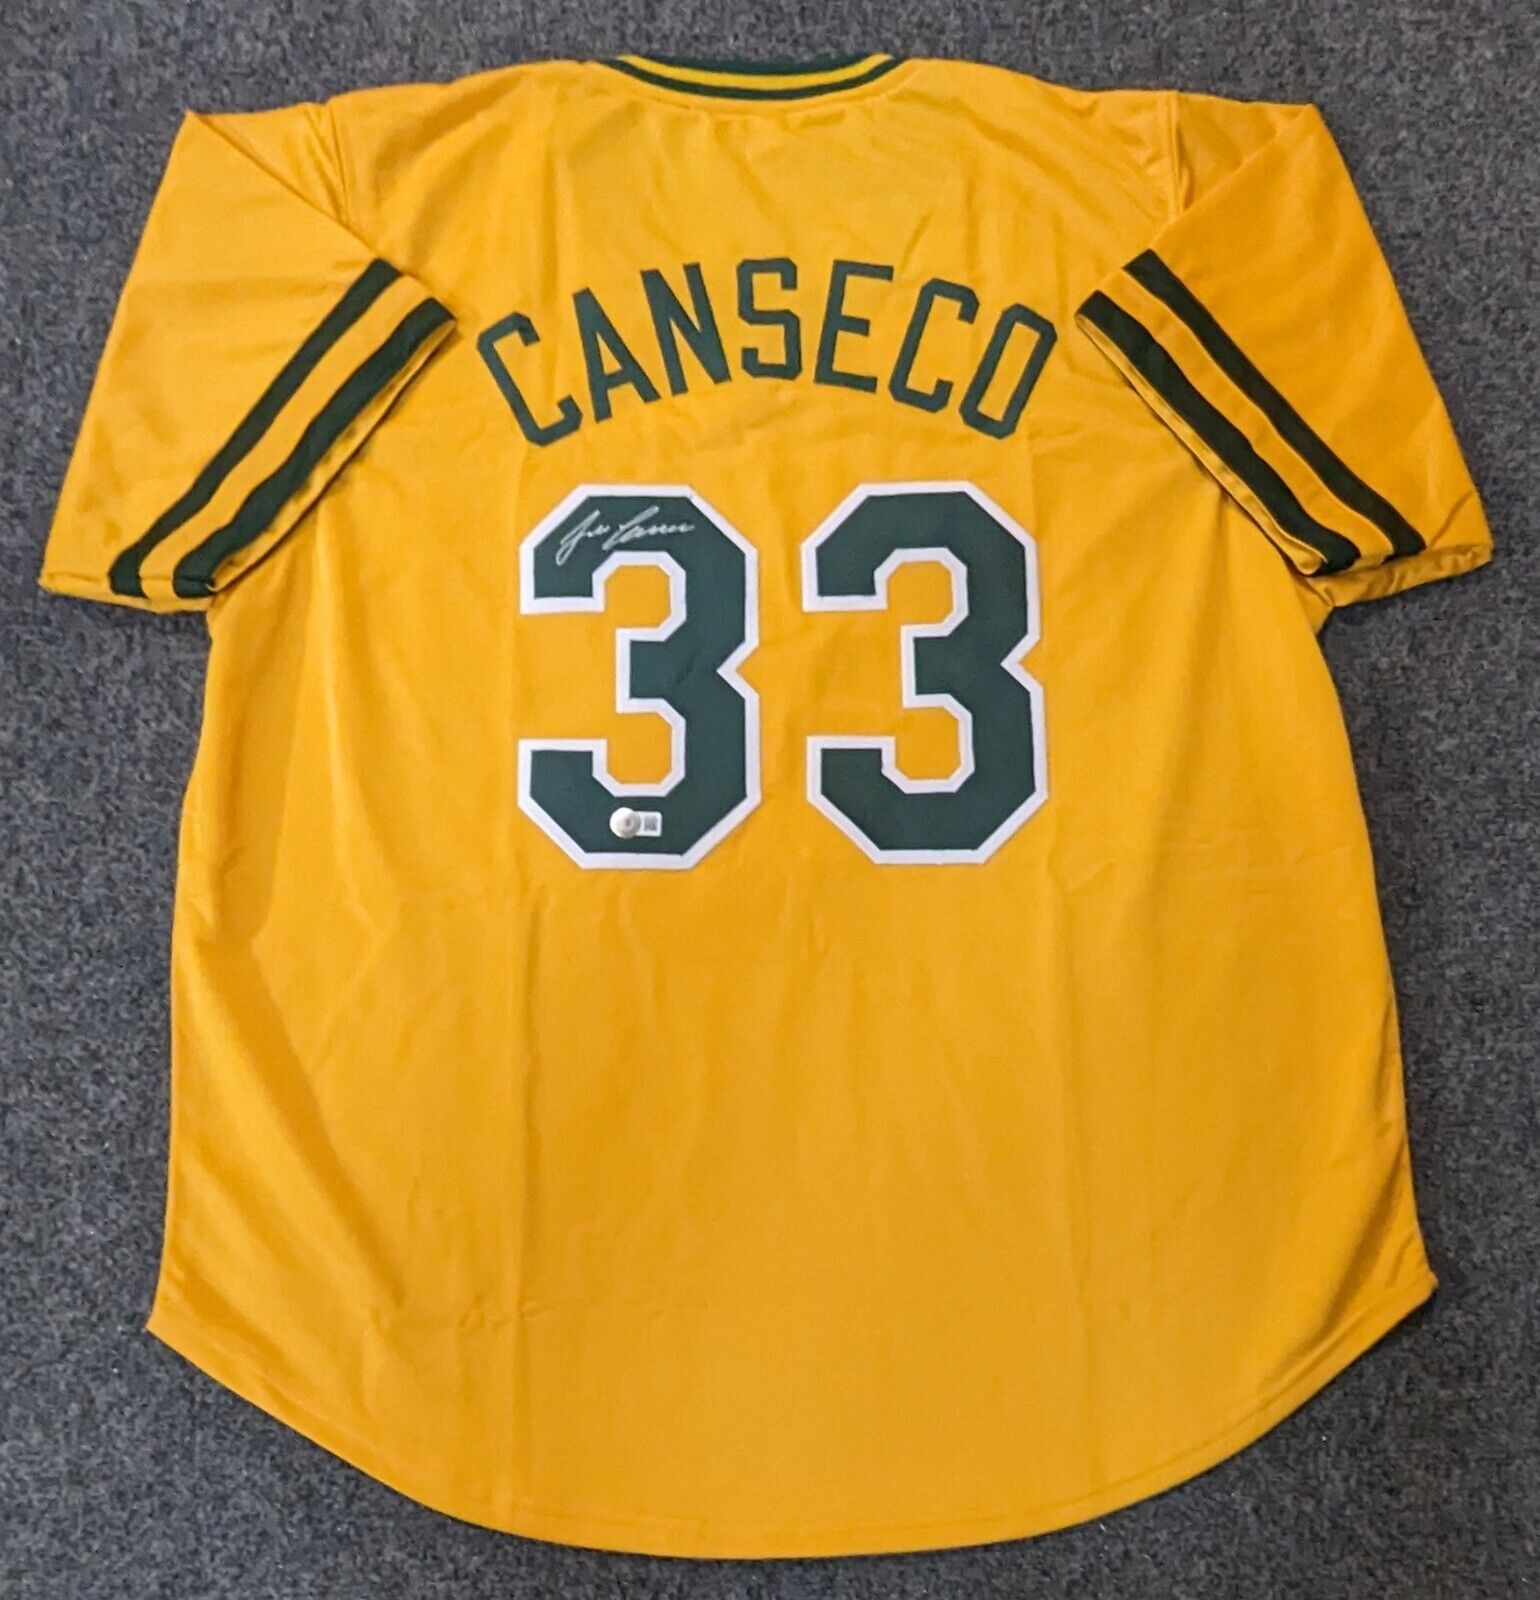 canseco signed jersey